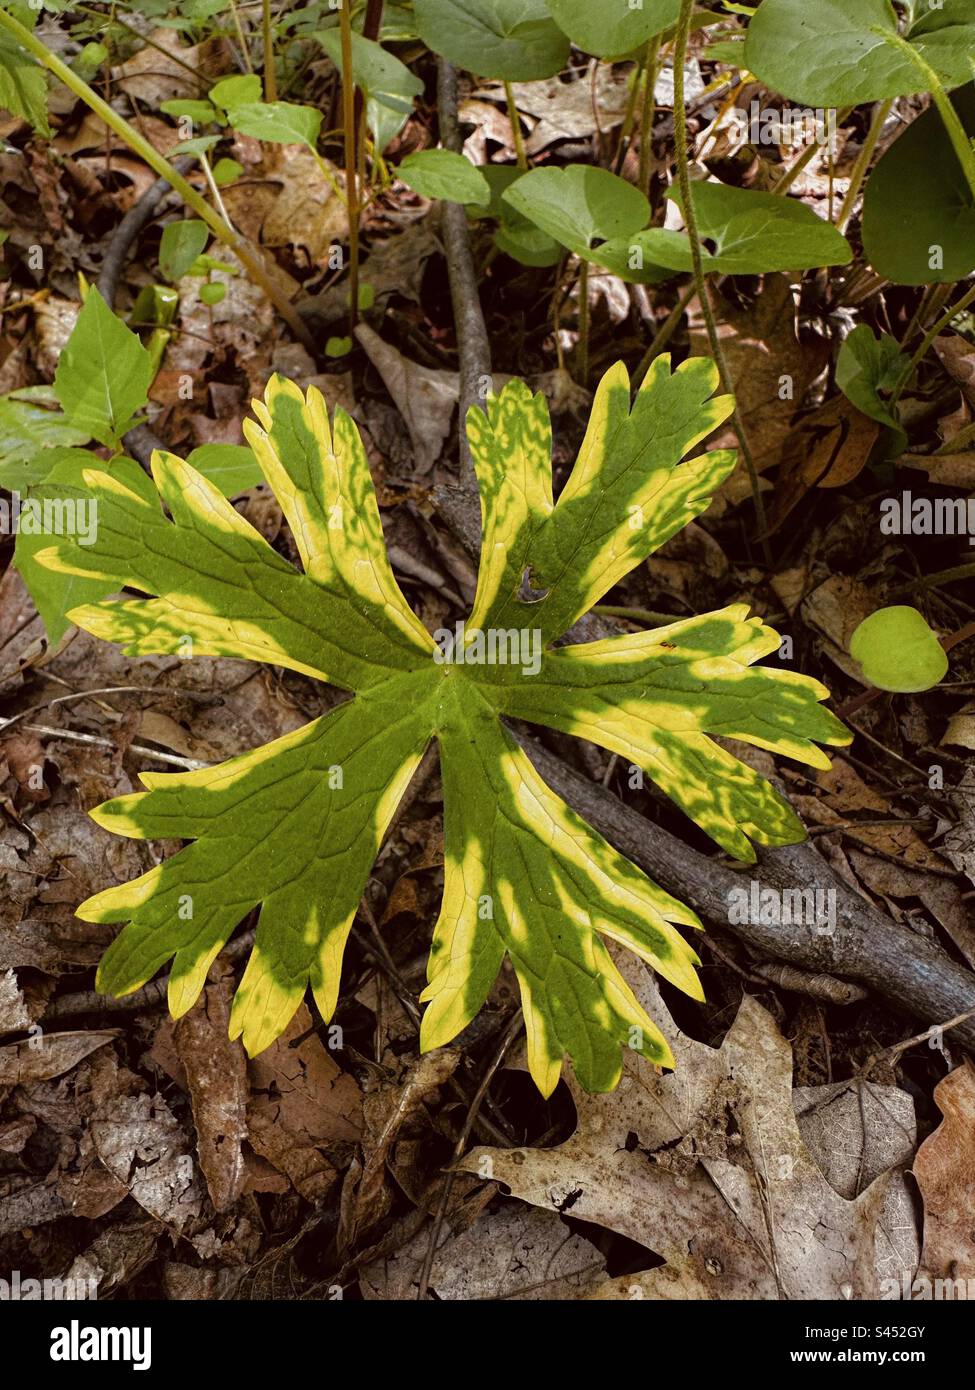 Wild geranium leaf with beautiful yellow variegation from mosaic disease growing on the forest floor. Stock Photo